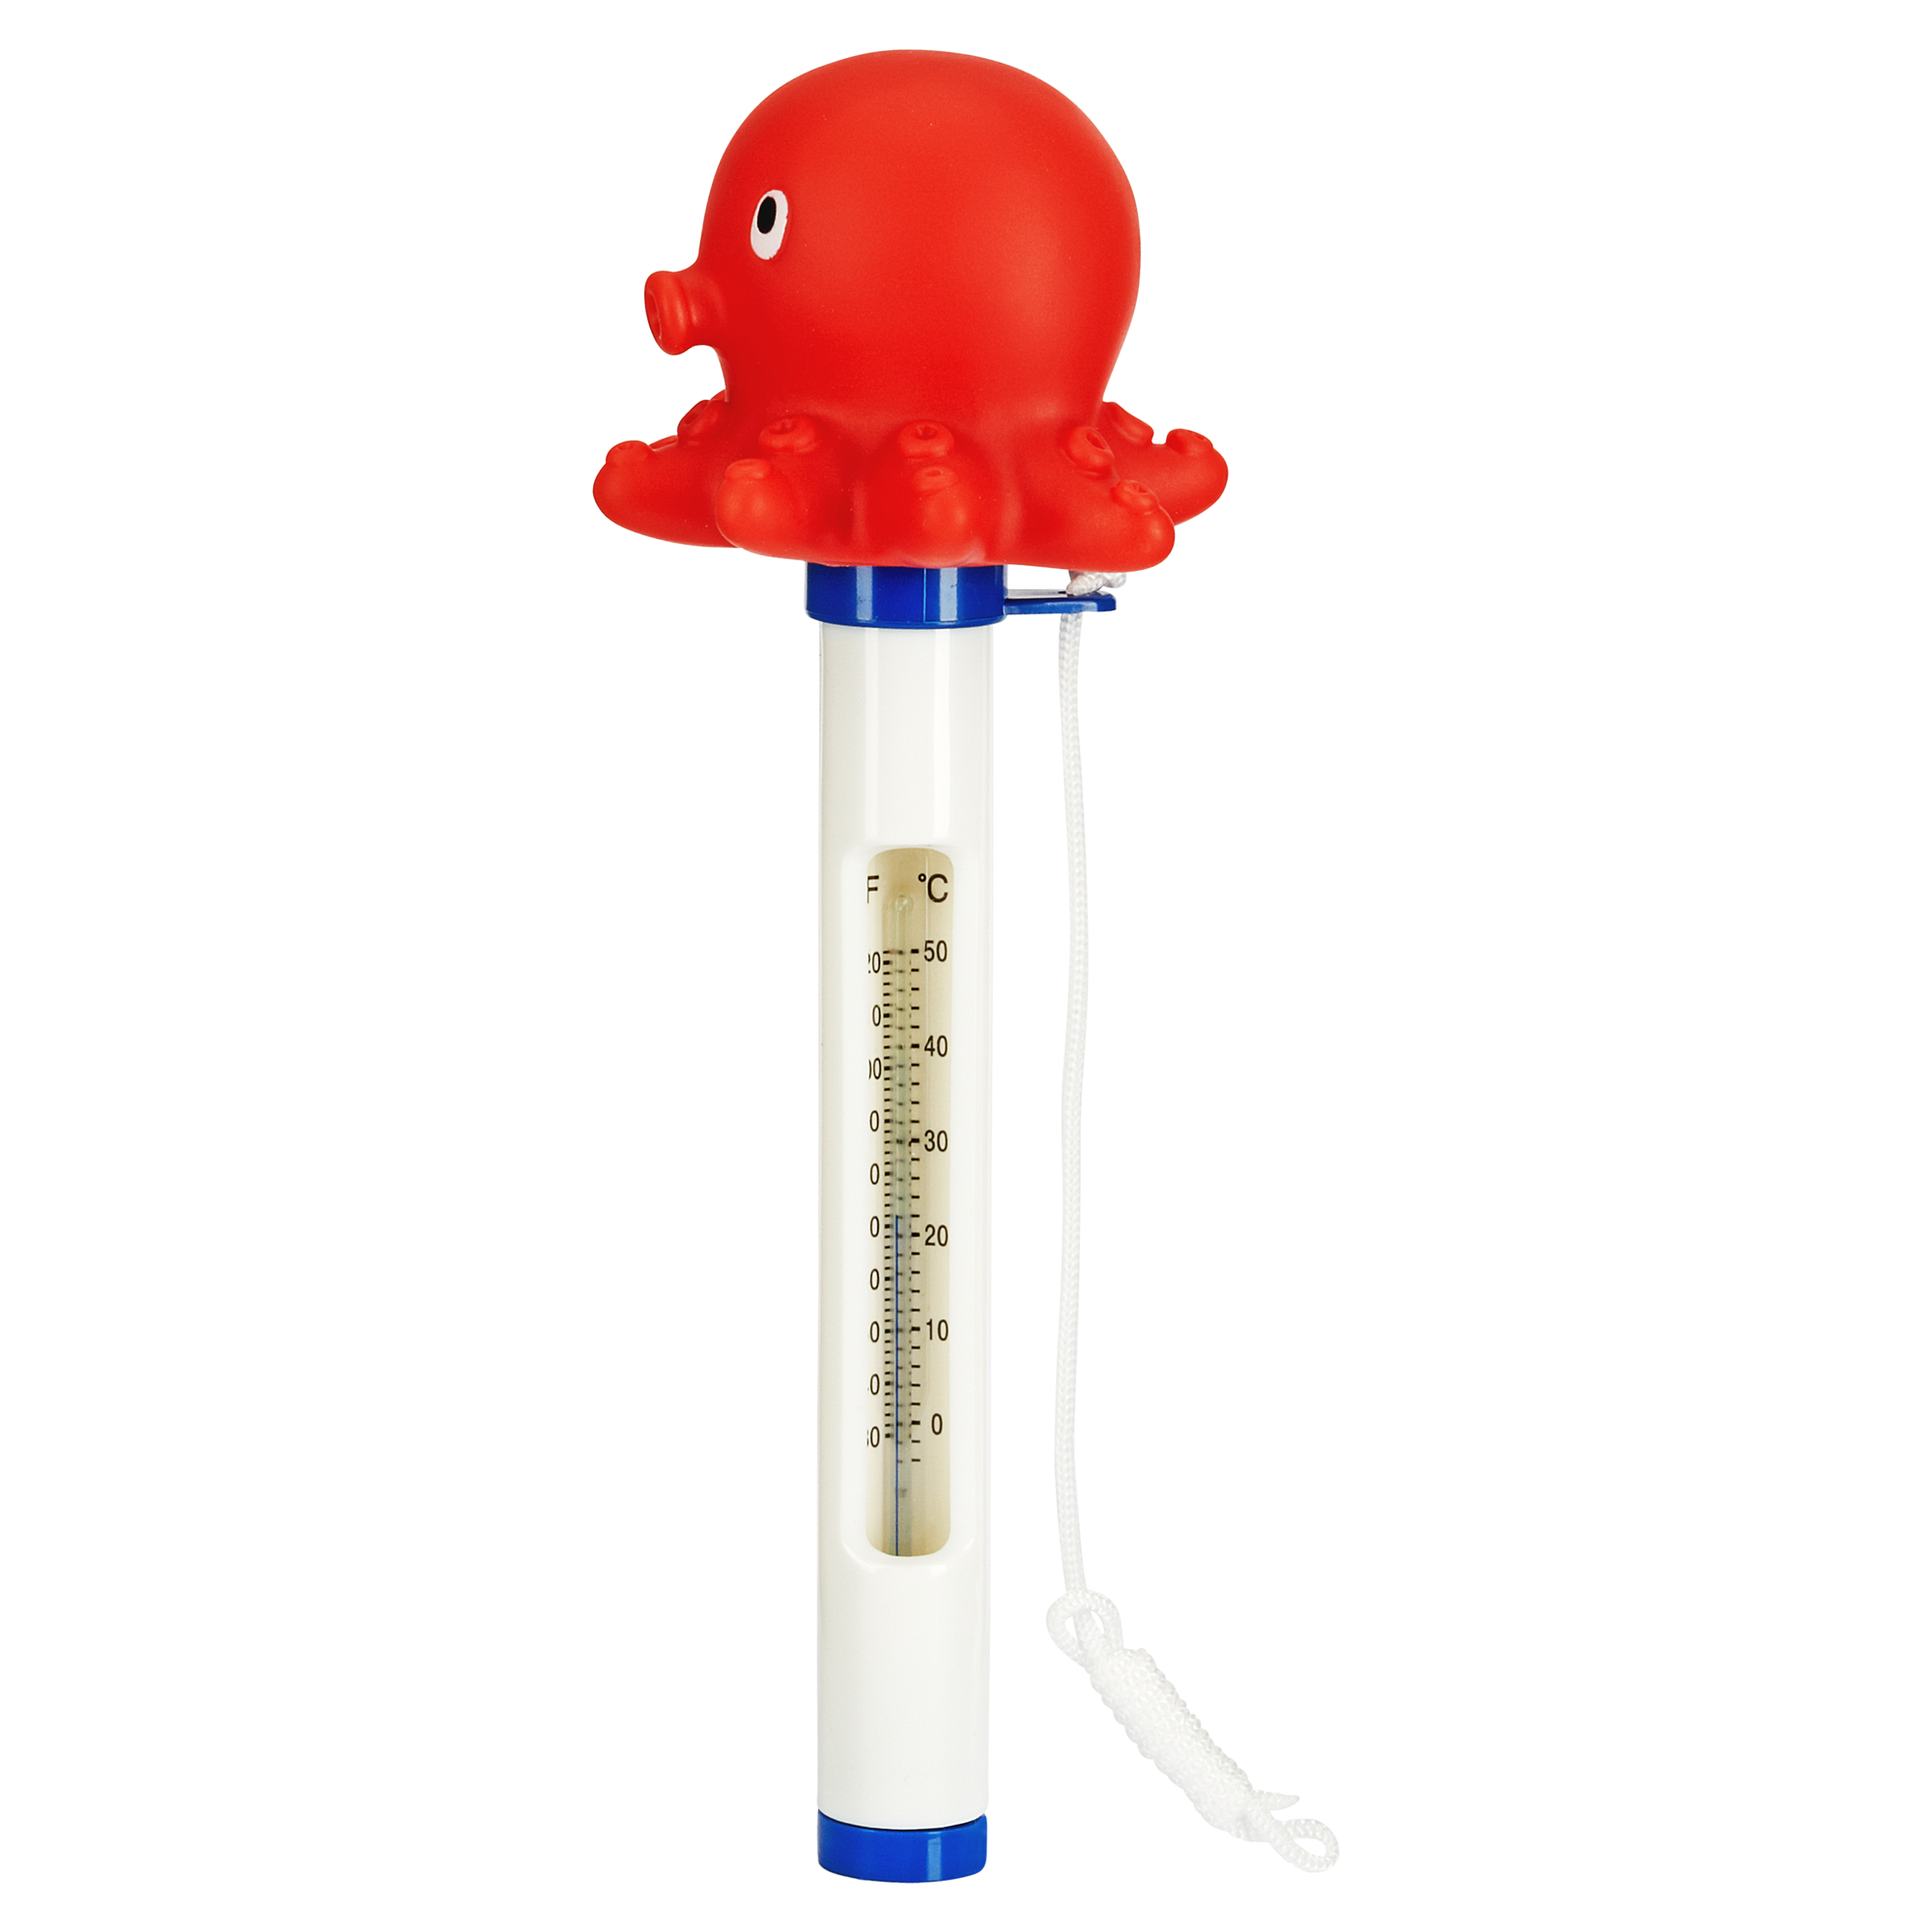 Thermometer mit Tiermotiv + product picture